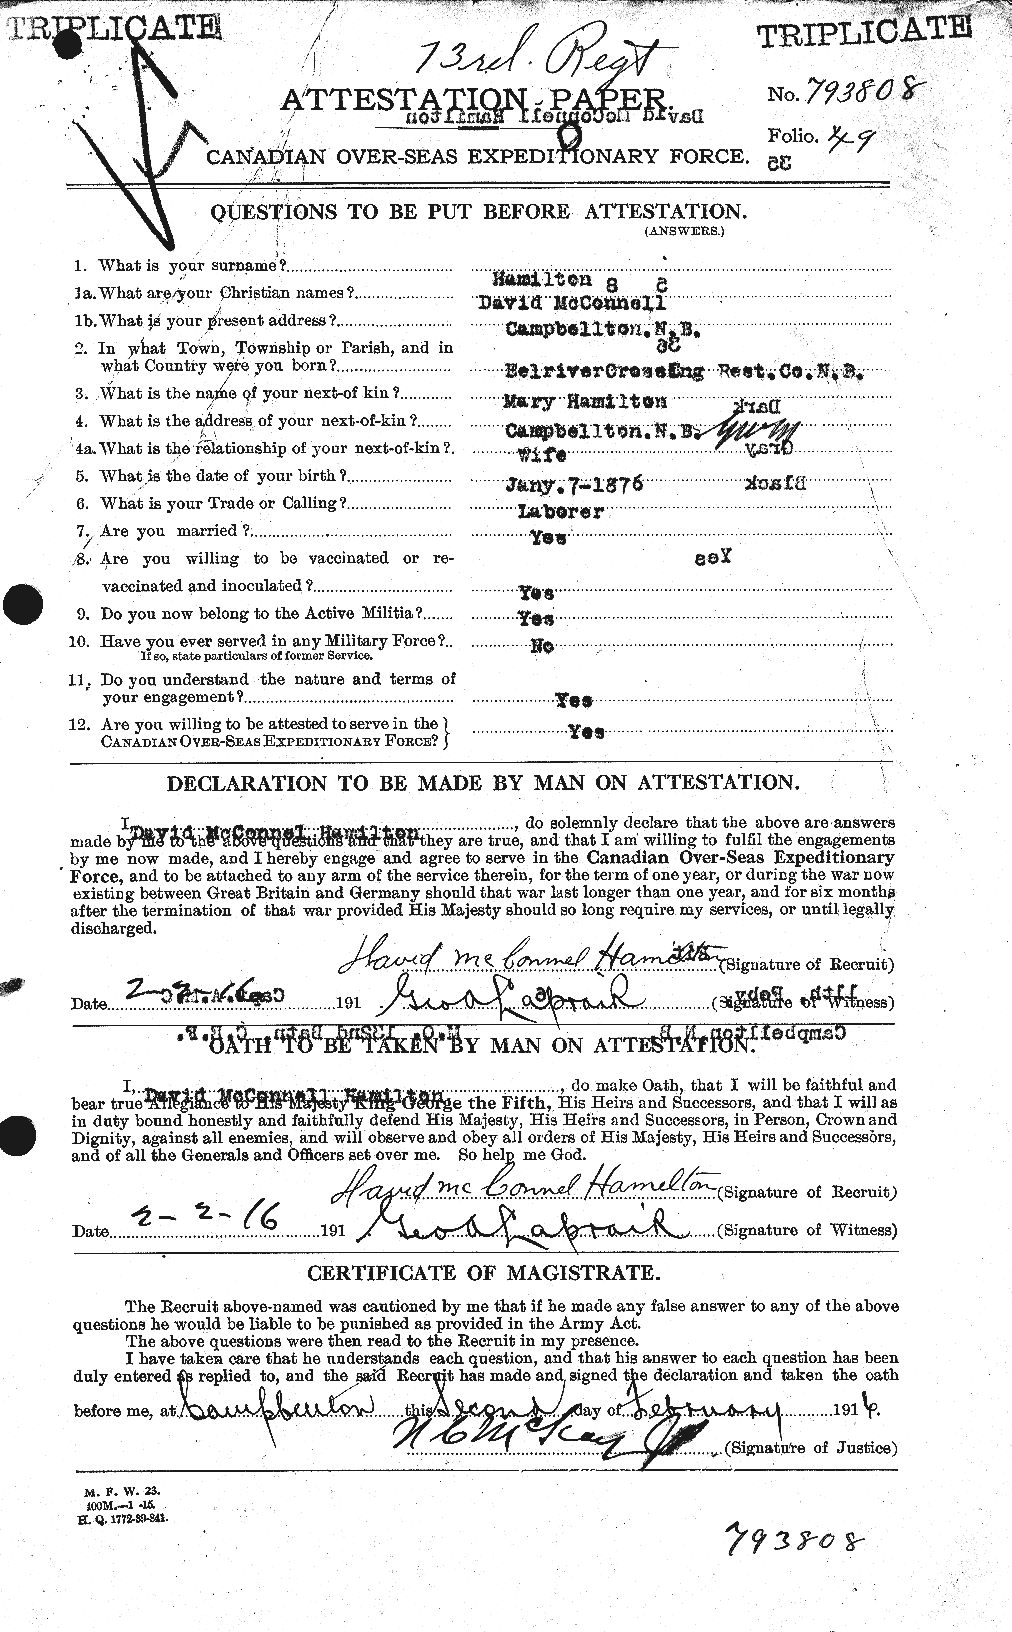 Personnel Records of the First World War - CEF 375351a